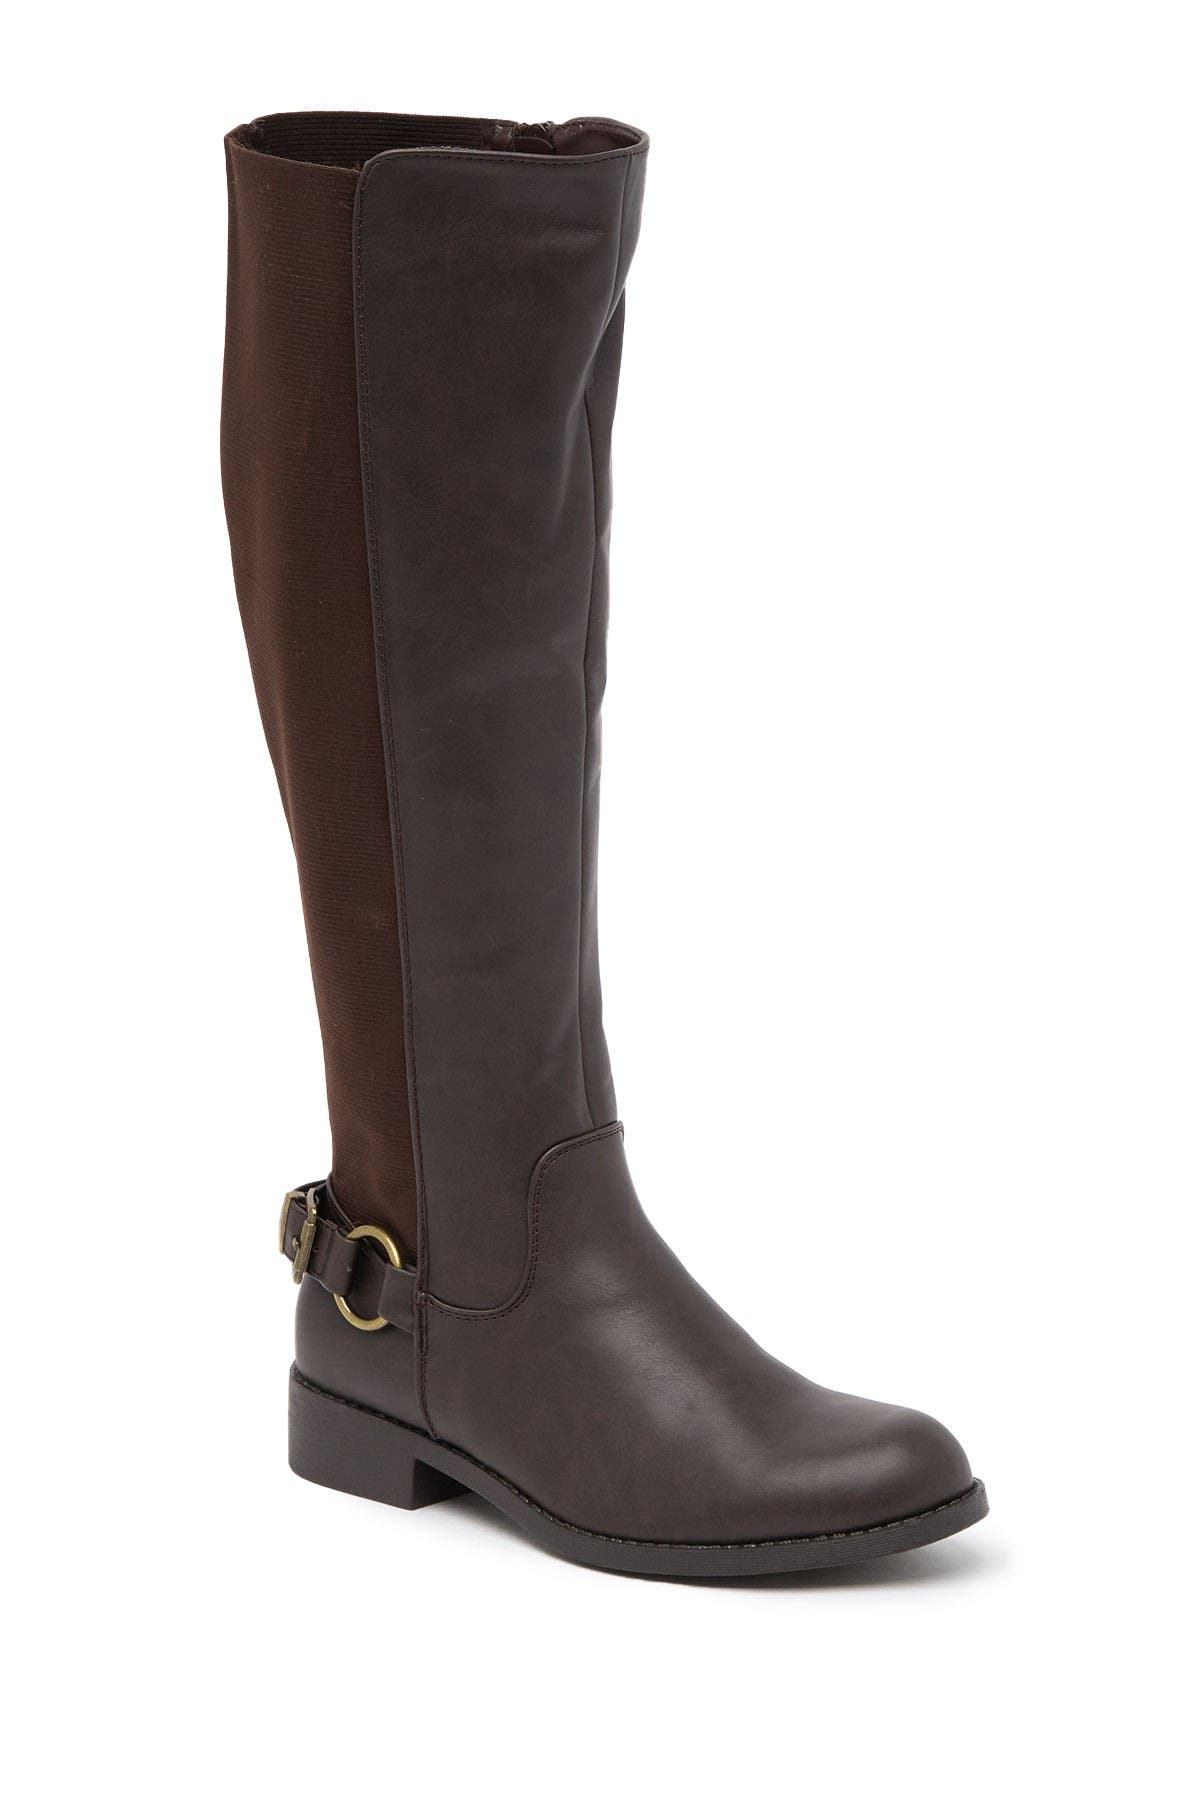 nordstrom long boots